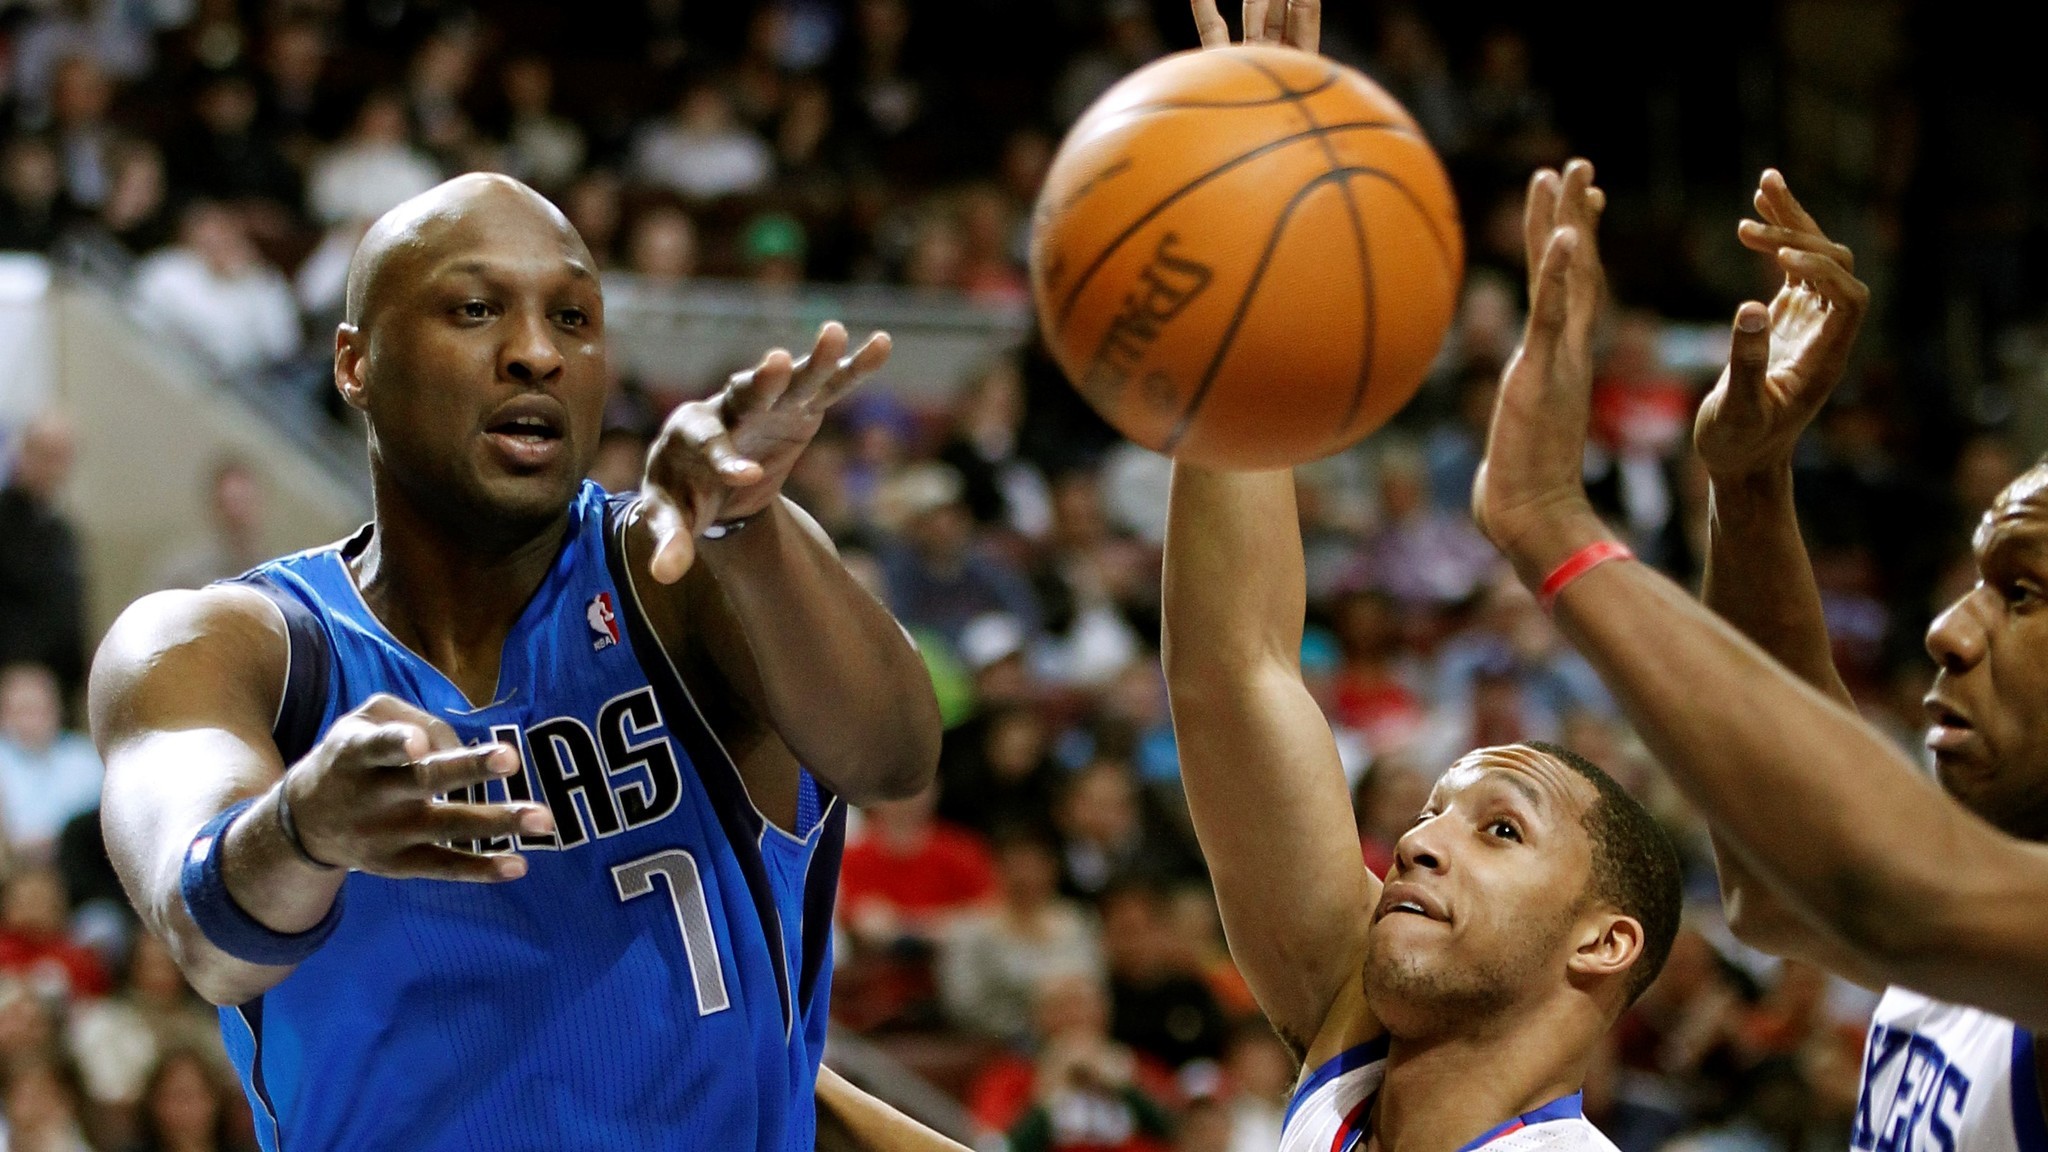 Lamar Odom says Mark Cuban heckled and kicked him when he was on the Mavericks